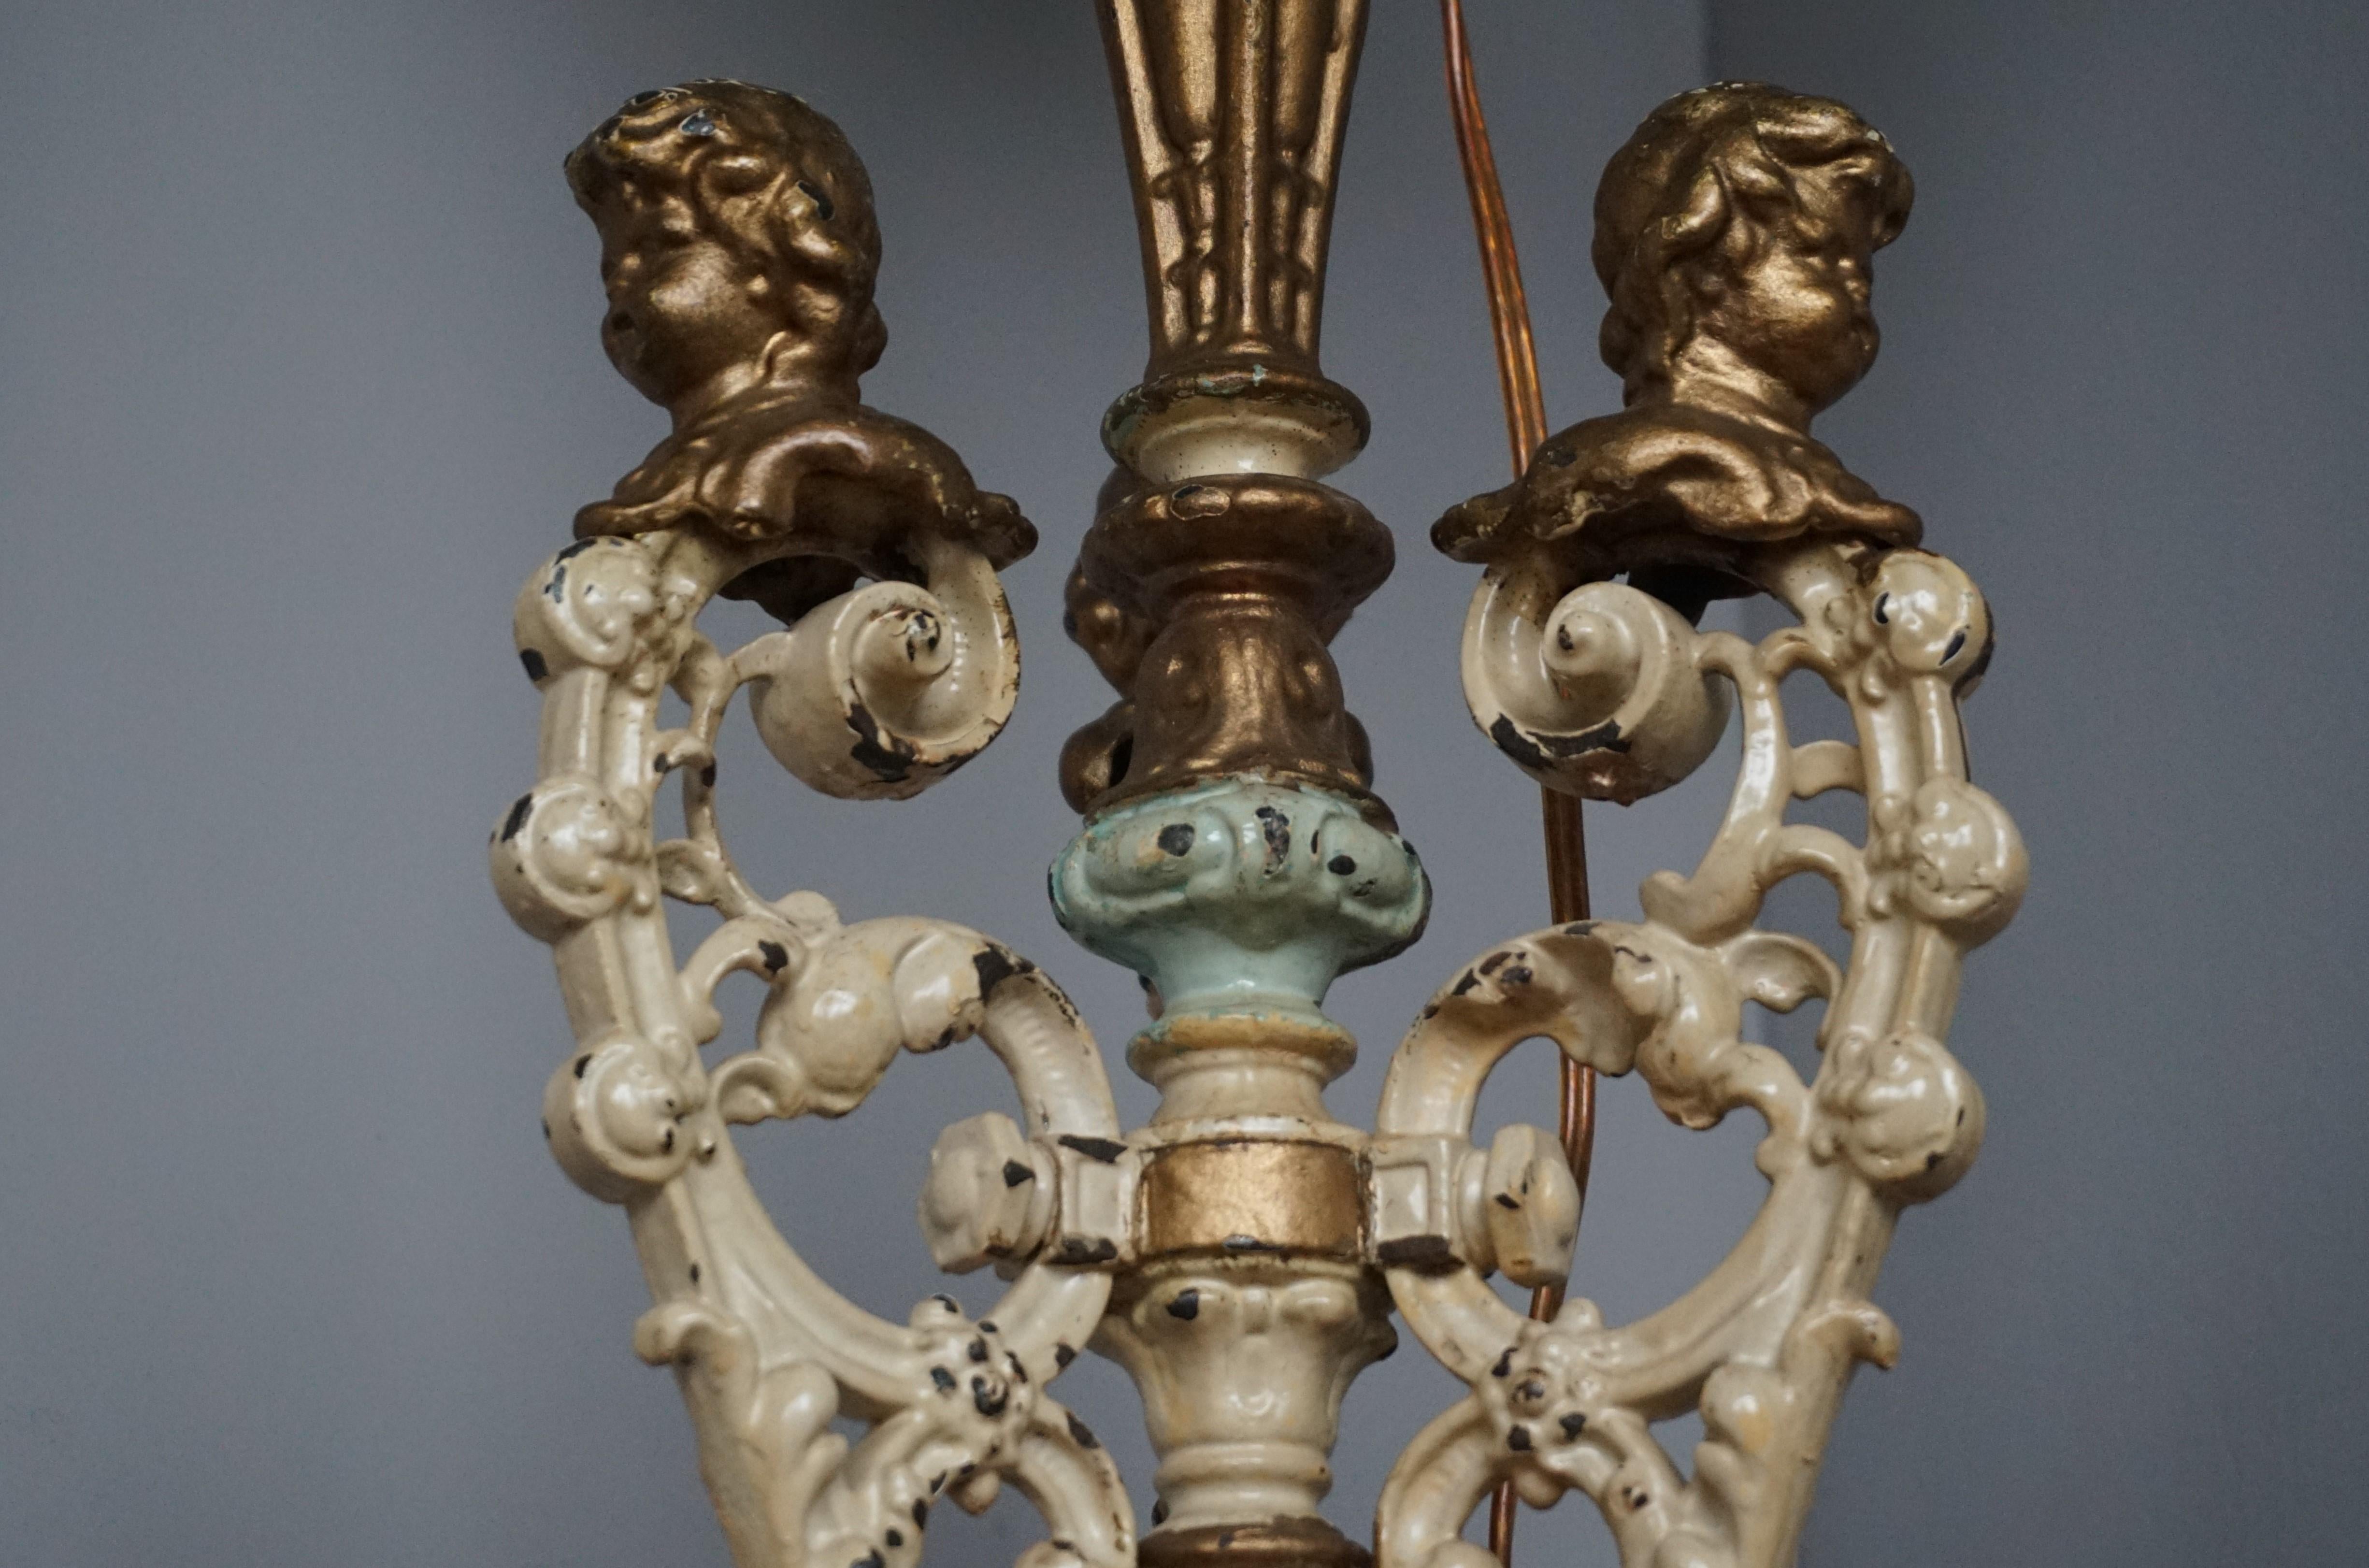 Antique and Painted Cast Iron Baroque Revival Floor Lamp w. Putti Bust Sculpture For Sale 6